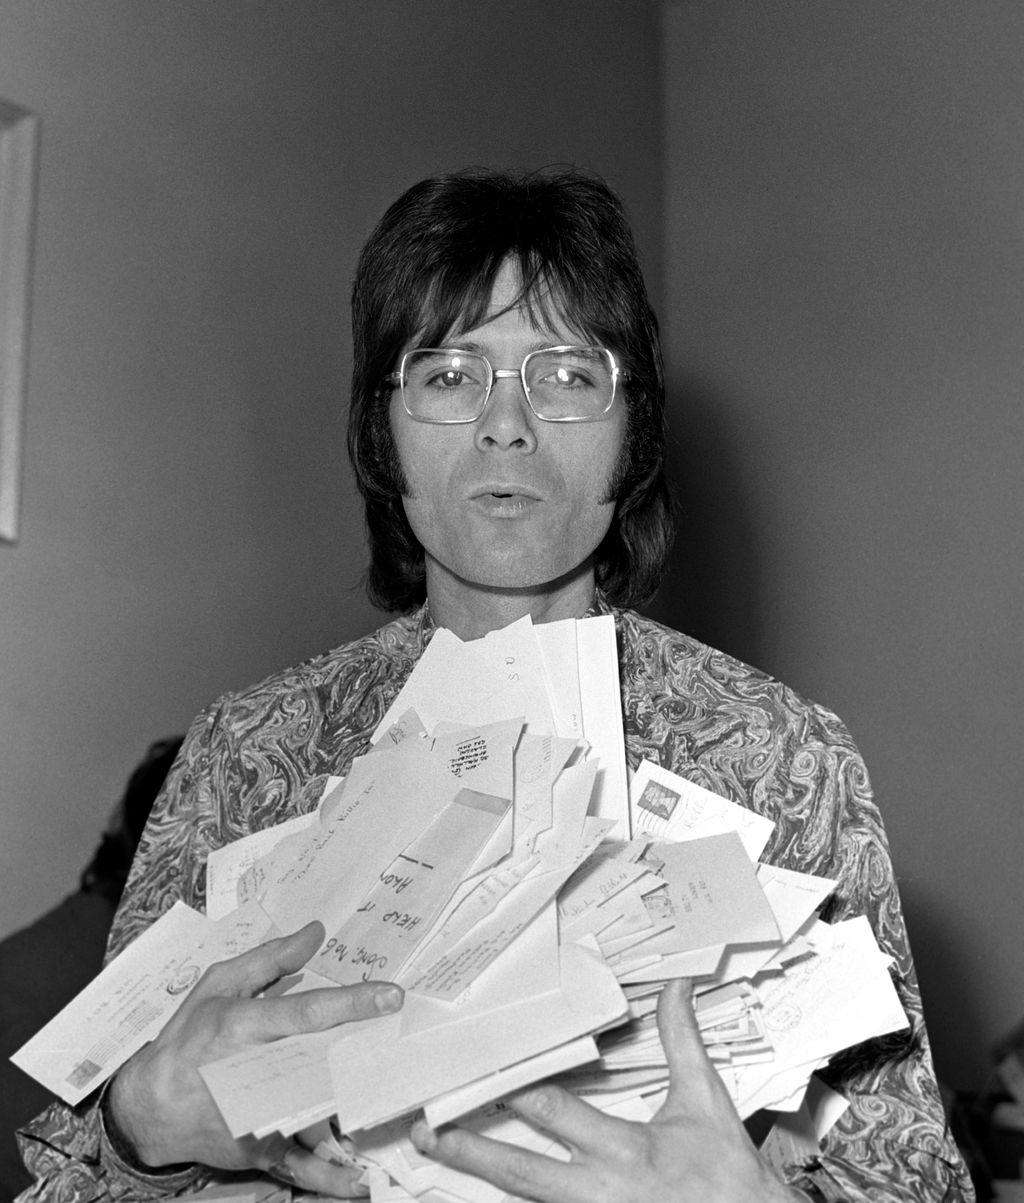 1973 Cliff Richard-galéria
Richard, Cliff Glasses B3276_169191 B3276 ZB3276_169191_0290 Richard Cliff Cliff Richard
With fan mail
February 1973
© Monitor Picture Library
Credit All Uses 